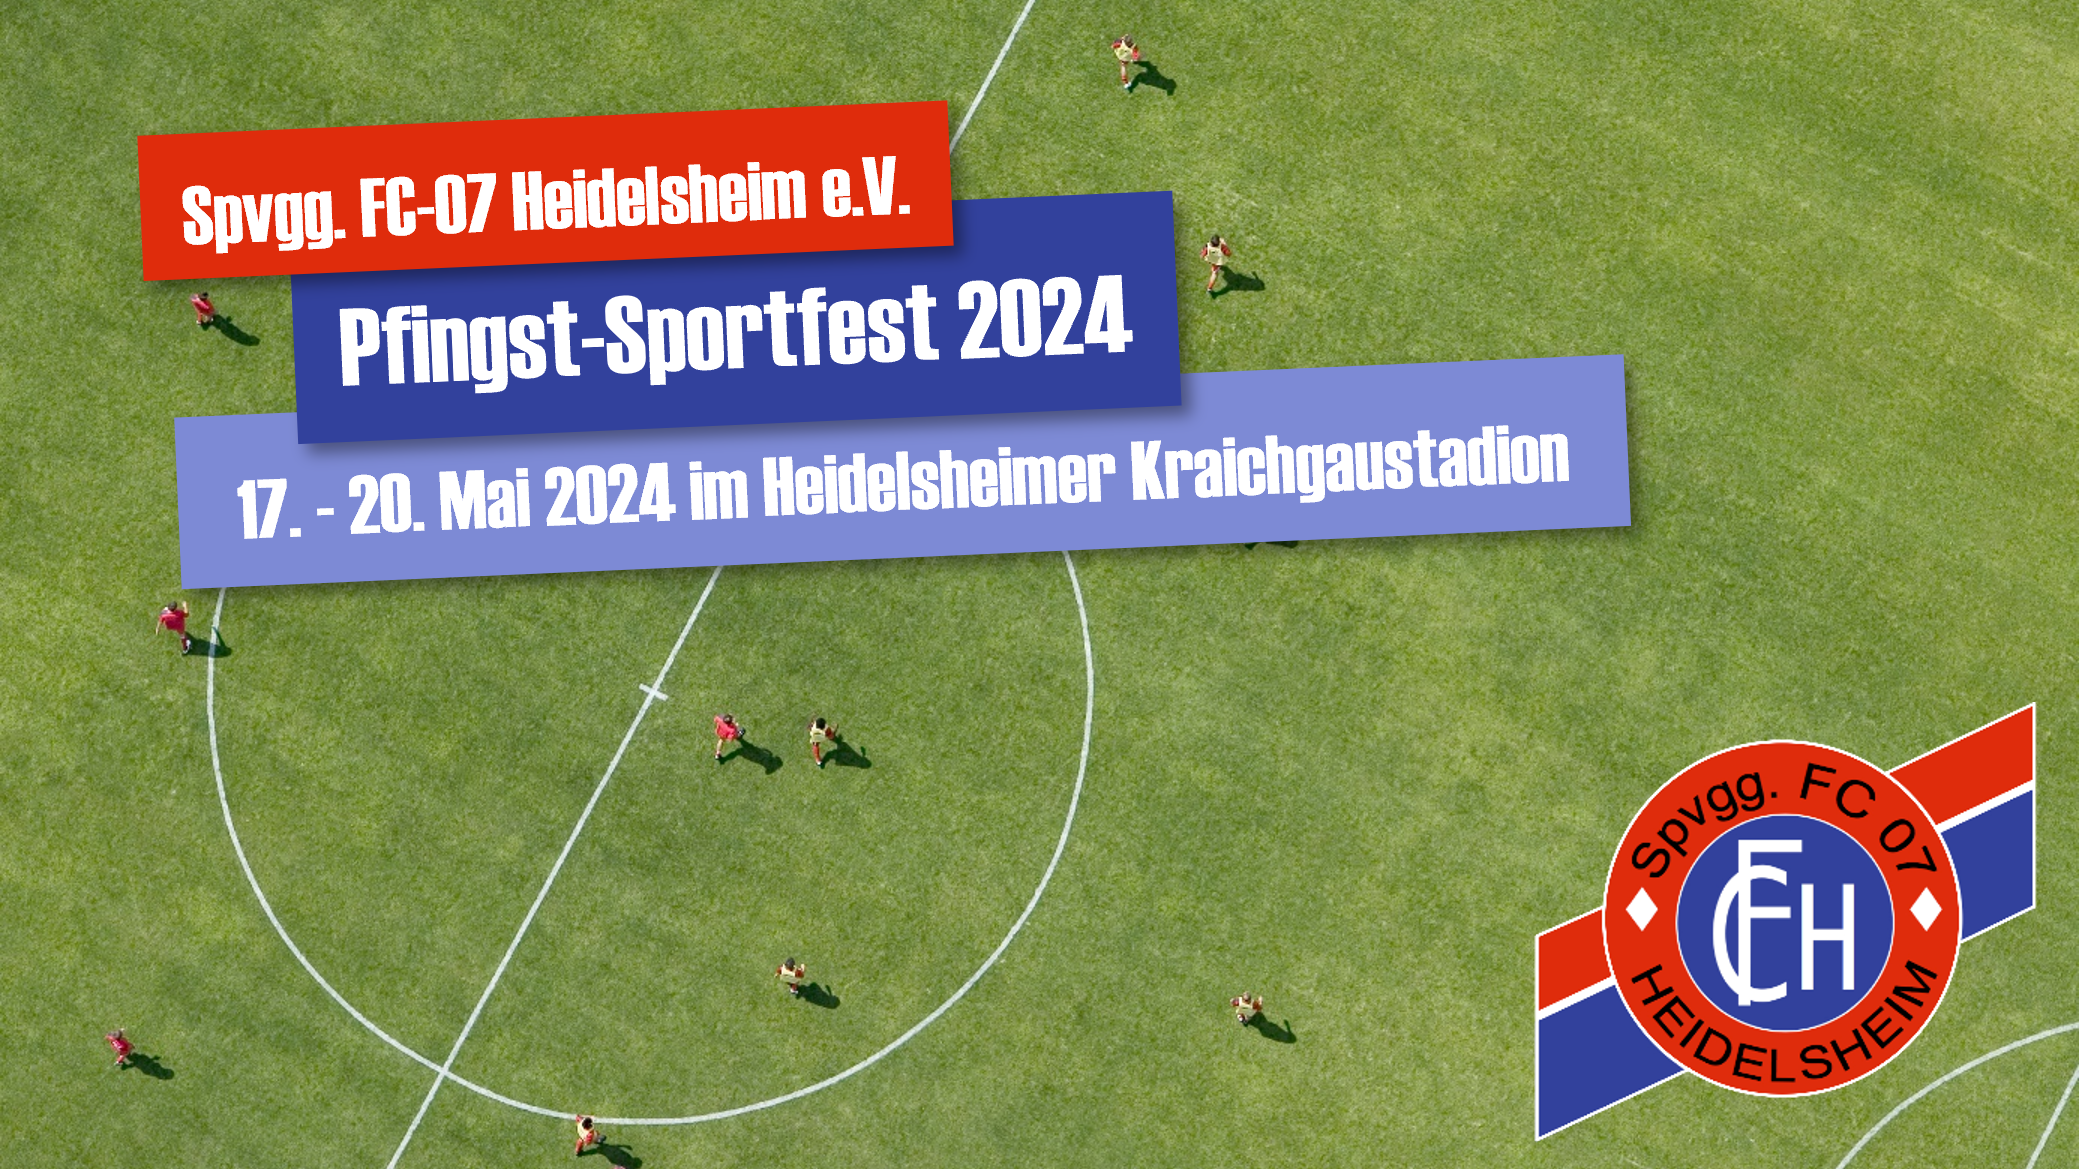 You are currently viewing Pfingst-Sportfest 2024 des FC-07 Heidelsheim vom 17. – 20. Mai 2024!